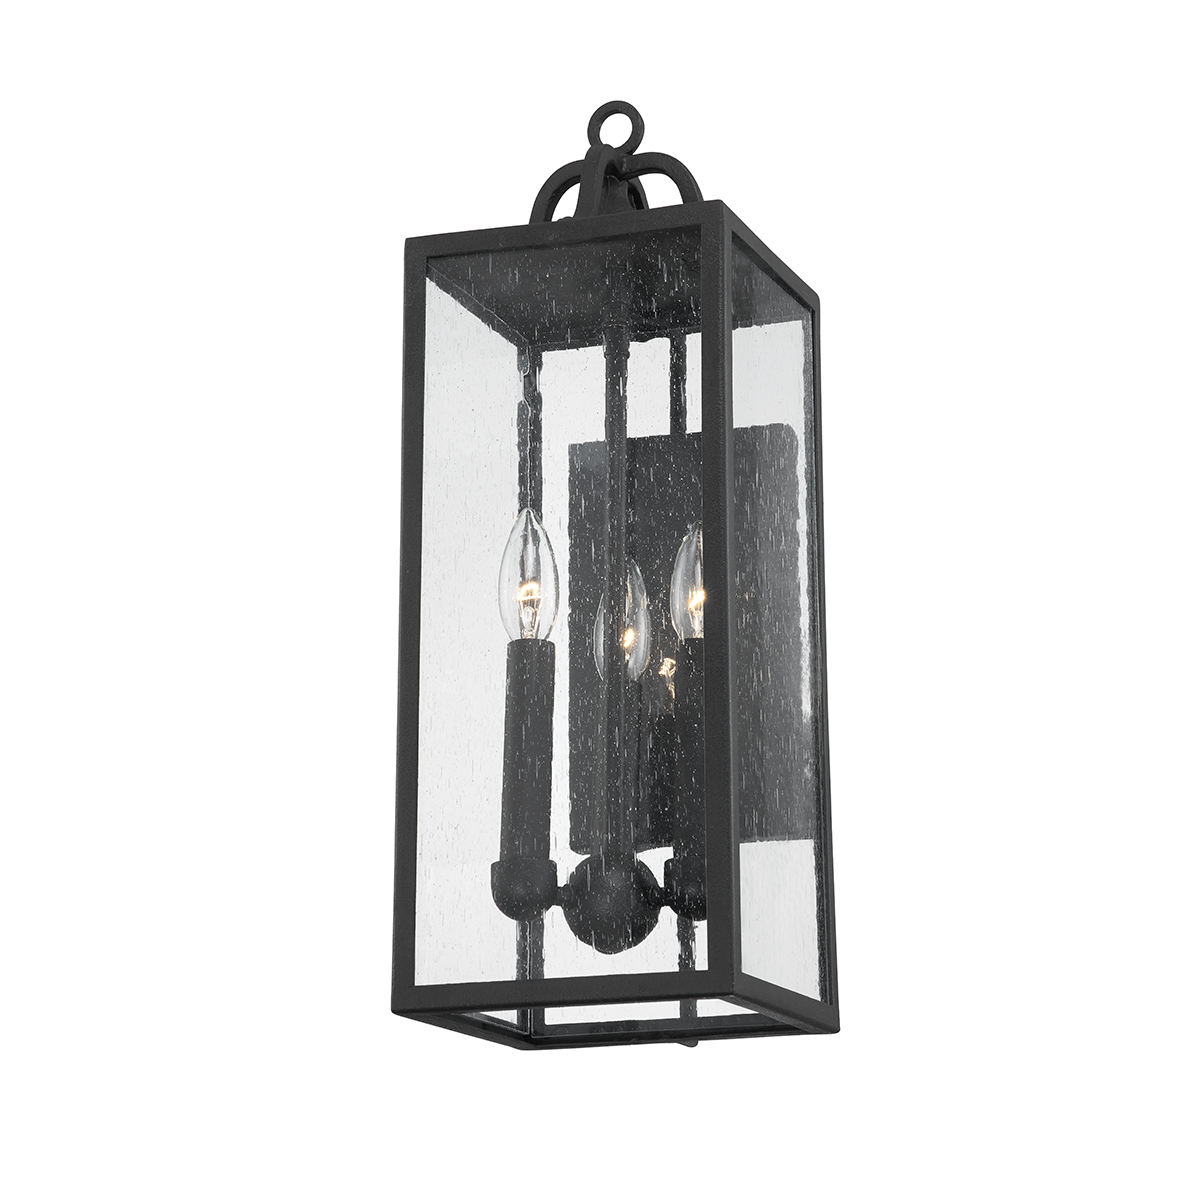 Troy Lighting 3 LIGHT EXTERIOR WALL SCONCE B2062 Outdoor l Wall Troy Lighting FORGED IRON  